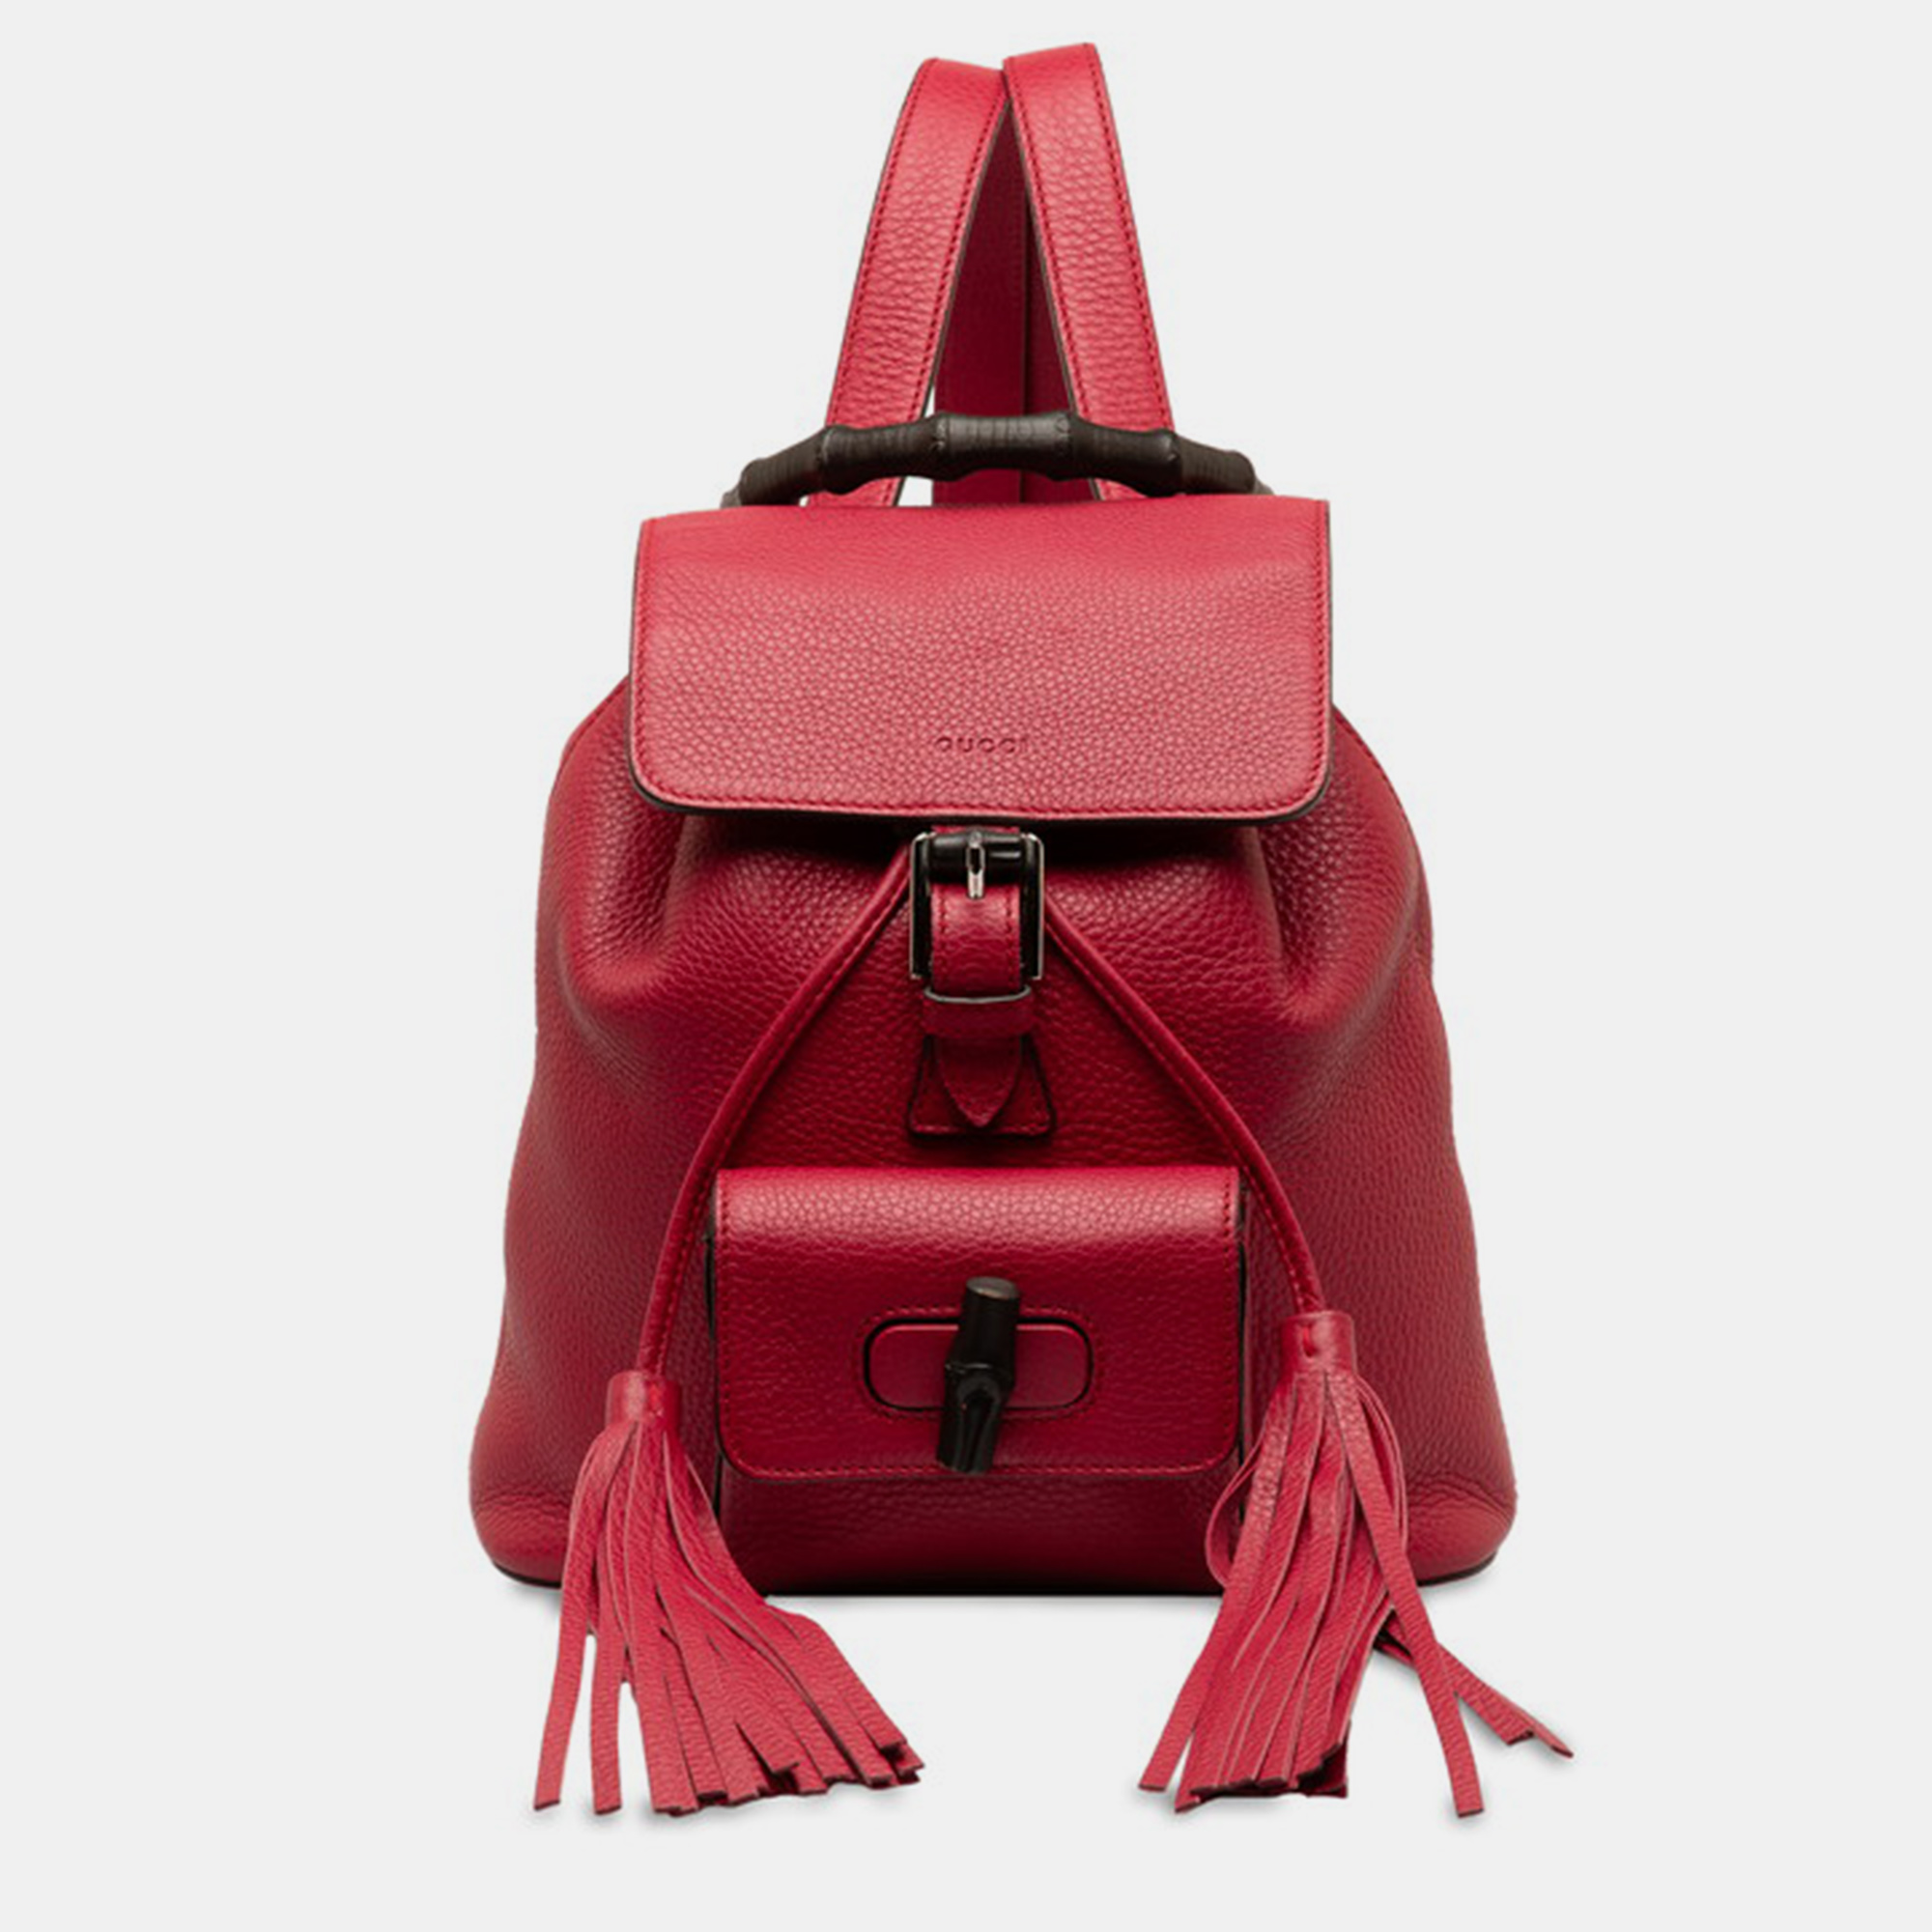 Gucci red leather bamboo fringe backpack